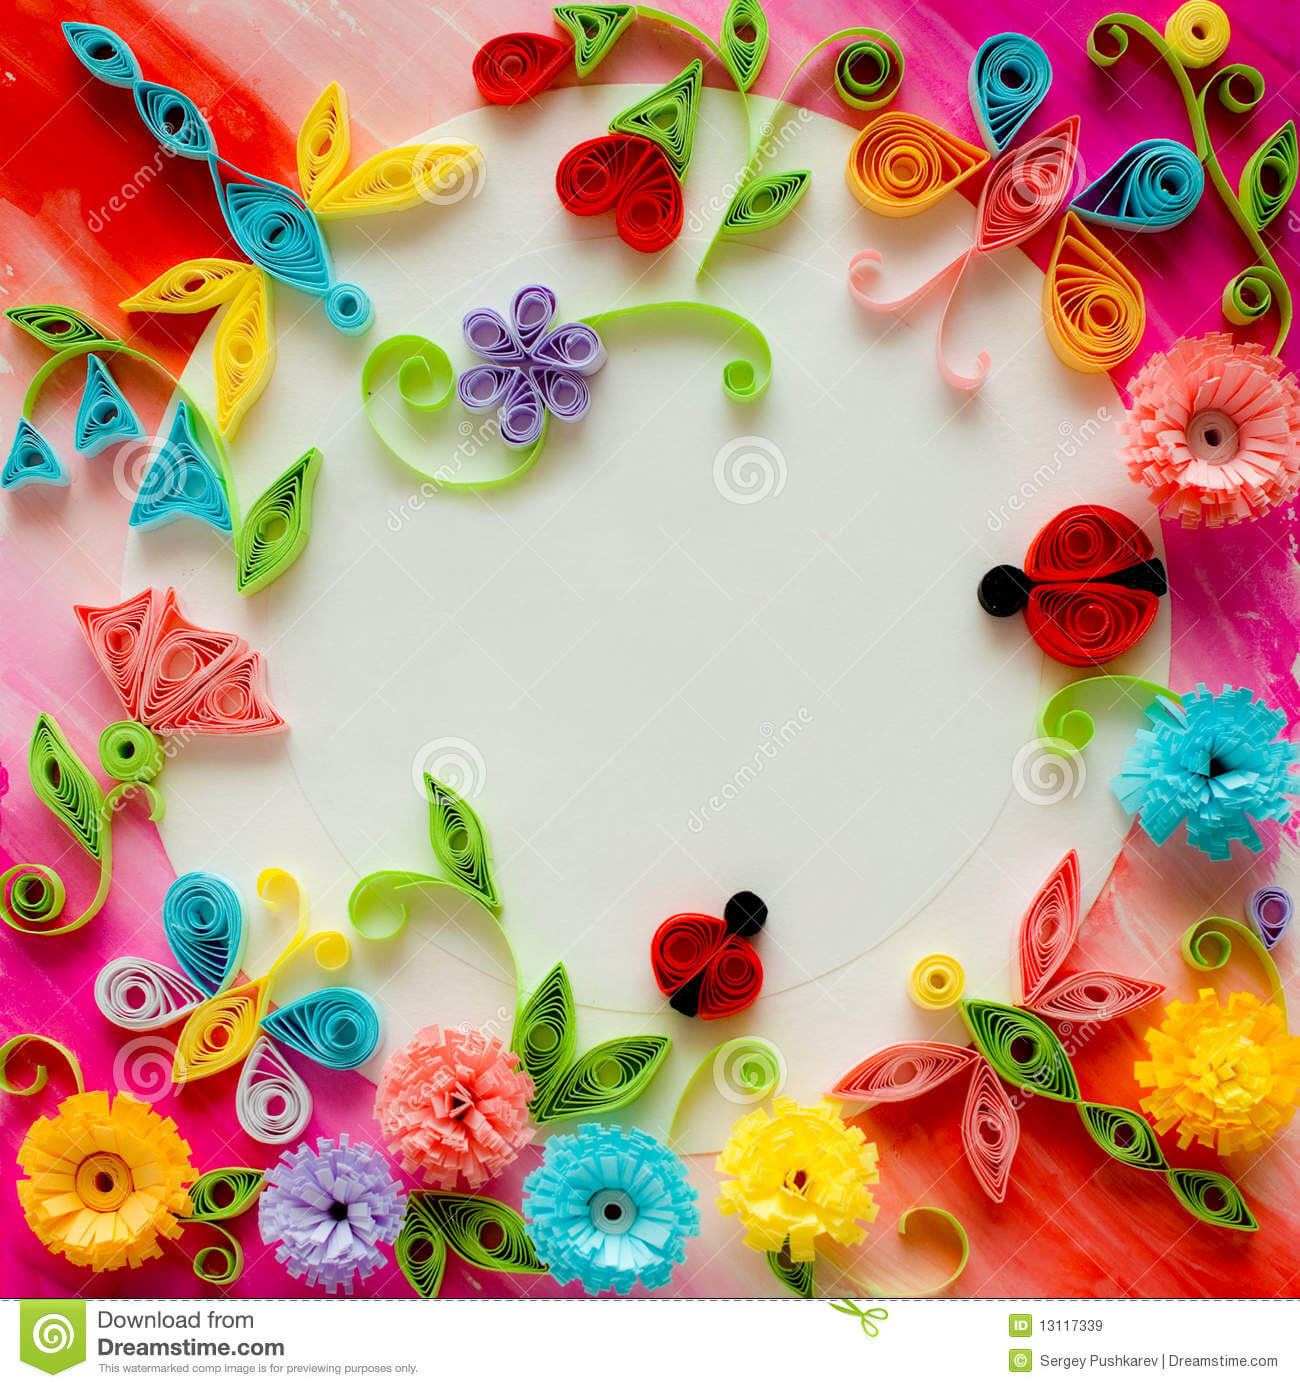 Quilling Greeting Card Blank Template Stock Image – Image Of Throughout Free Blank Greeting Card Templates For Word